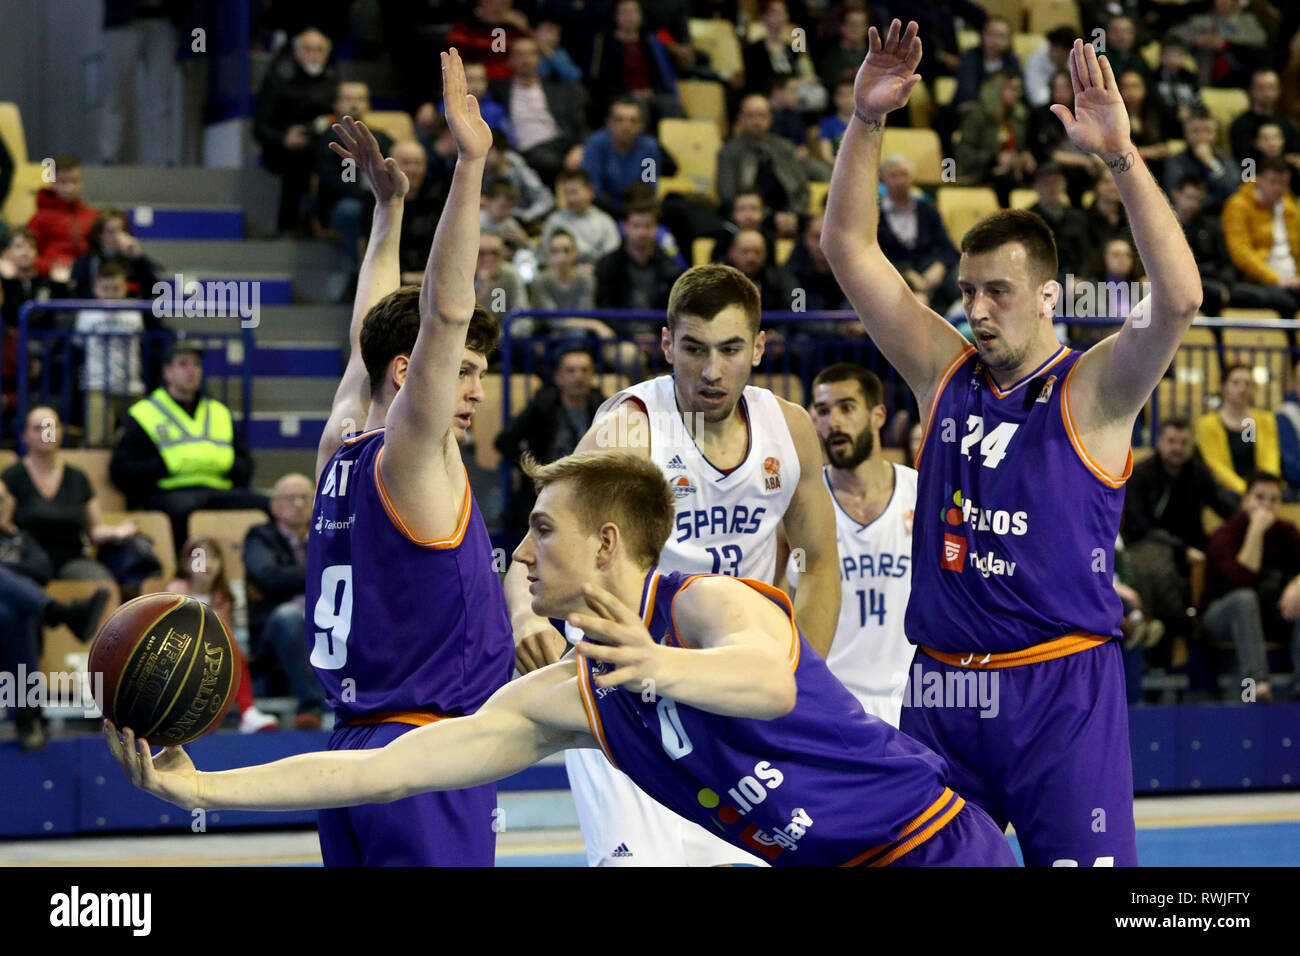 Sarajevo, Sarajevo. 6th Mar, 2019. Urban Oman (Front) of Helios Suns  competes during the ABA 2 League Match between Sarajevo Spars and Helios  Suns Domzale, in Sarajevo, Bosnia and Herzegovina on March